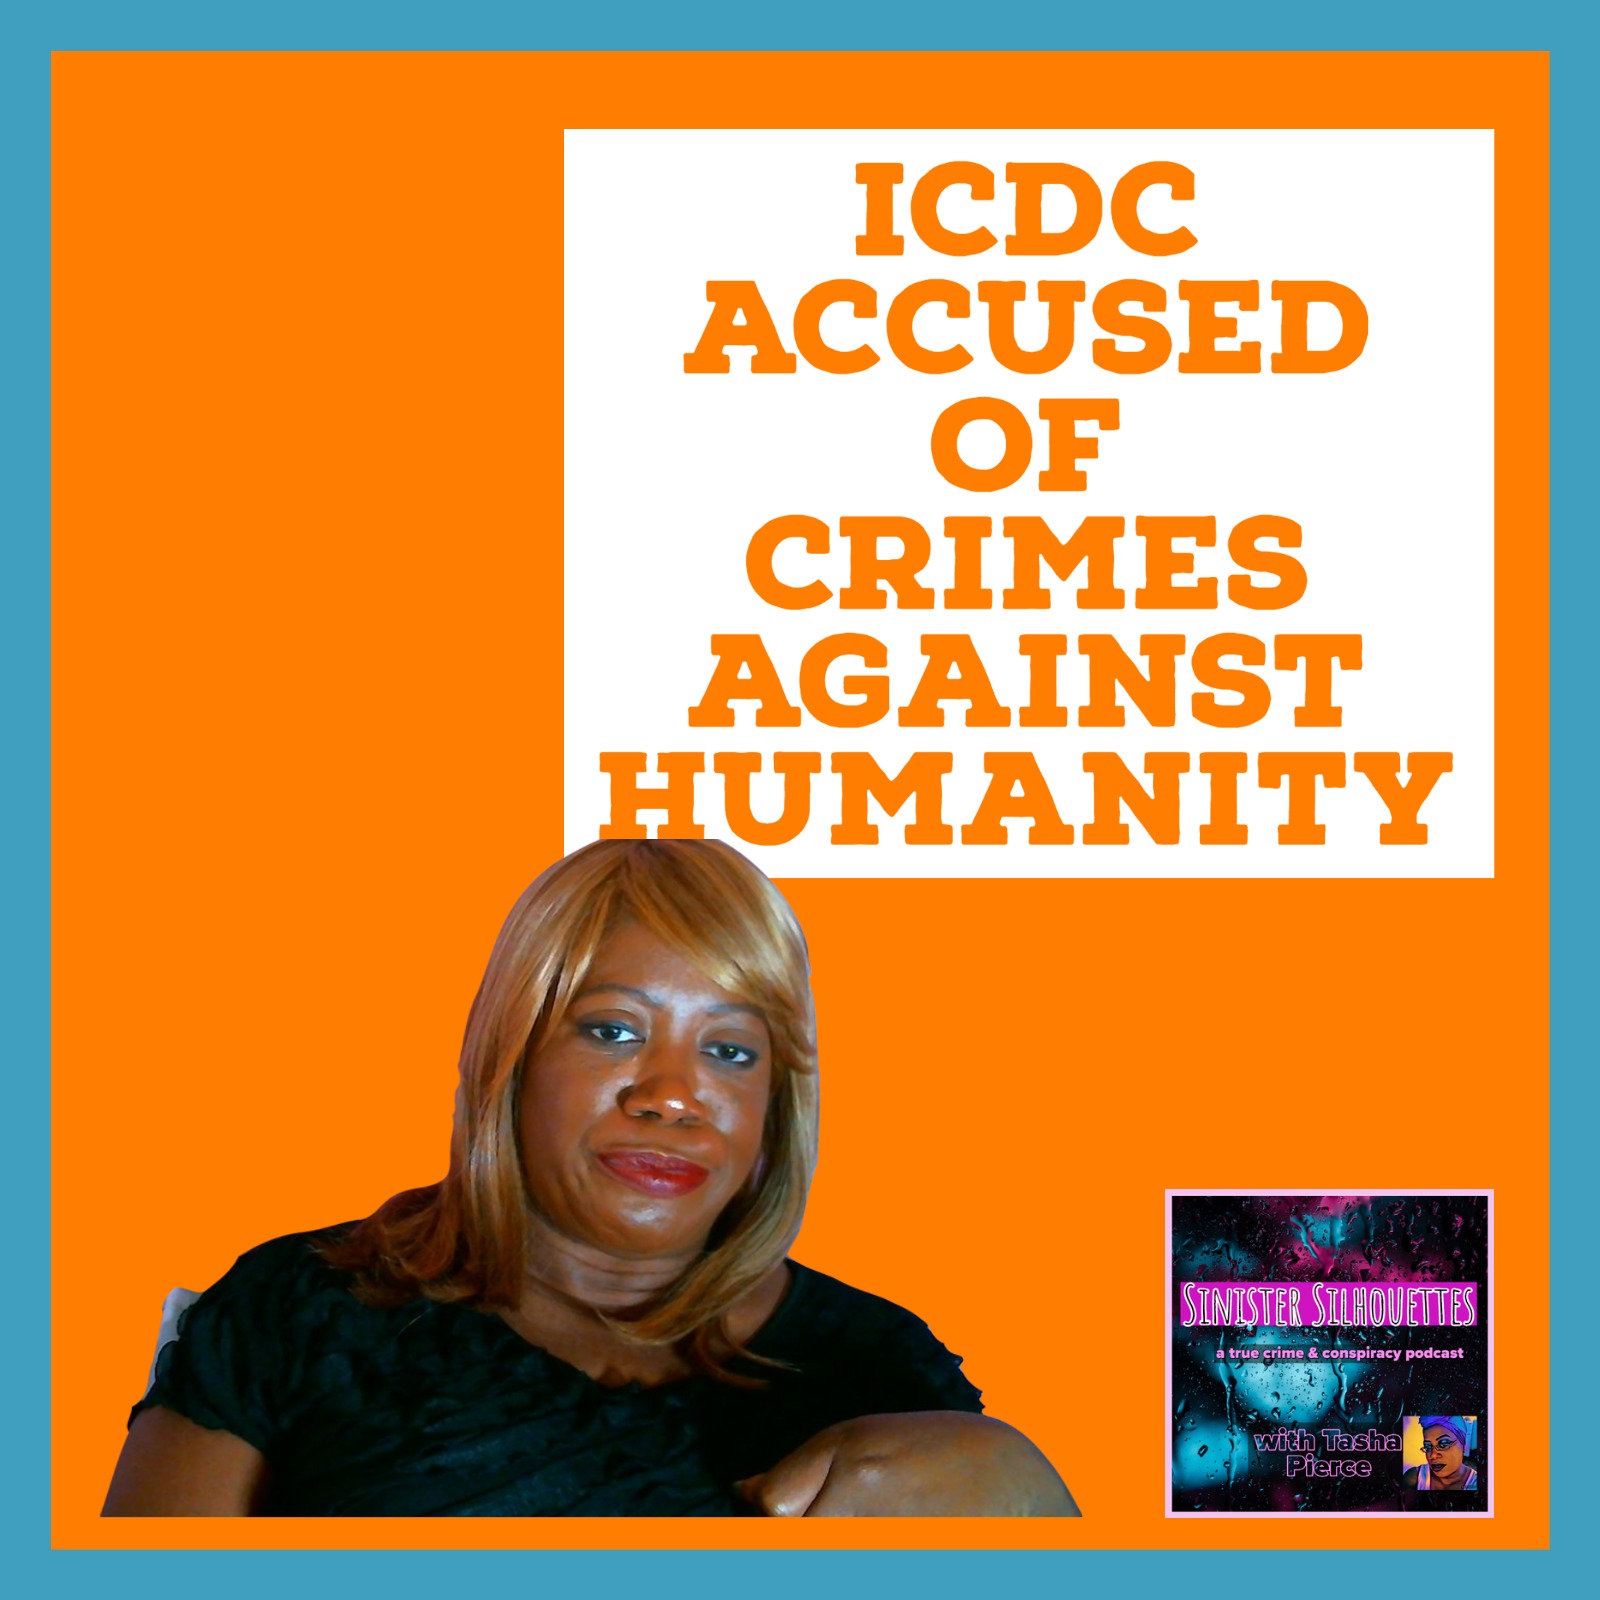 ICDC Accused of Crimes Against Humanity